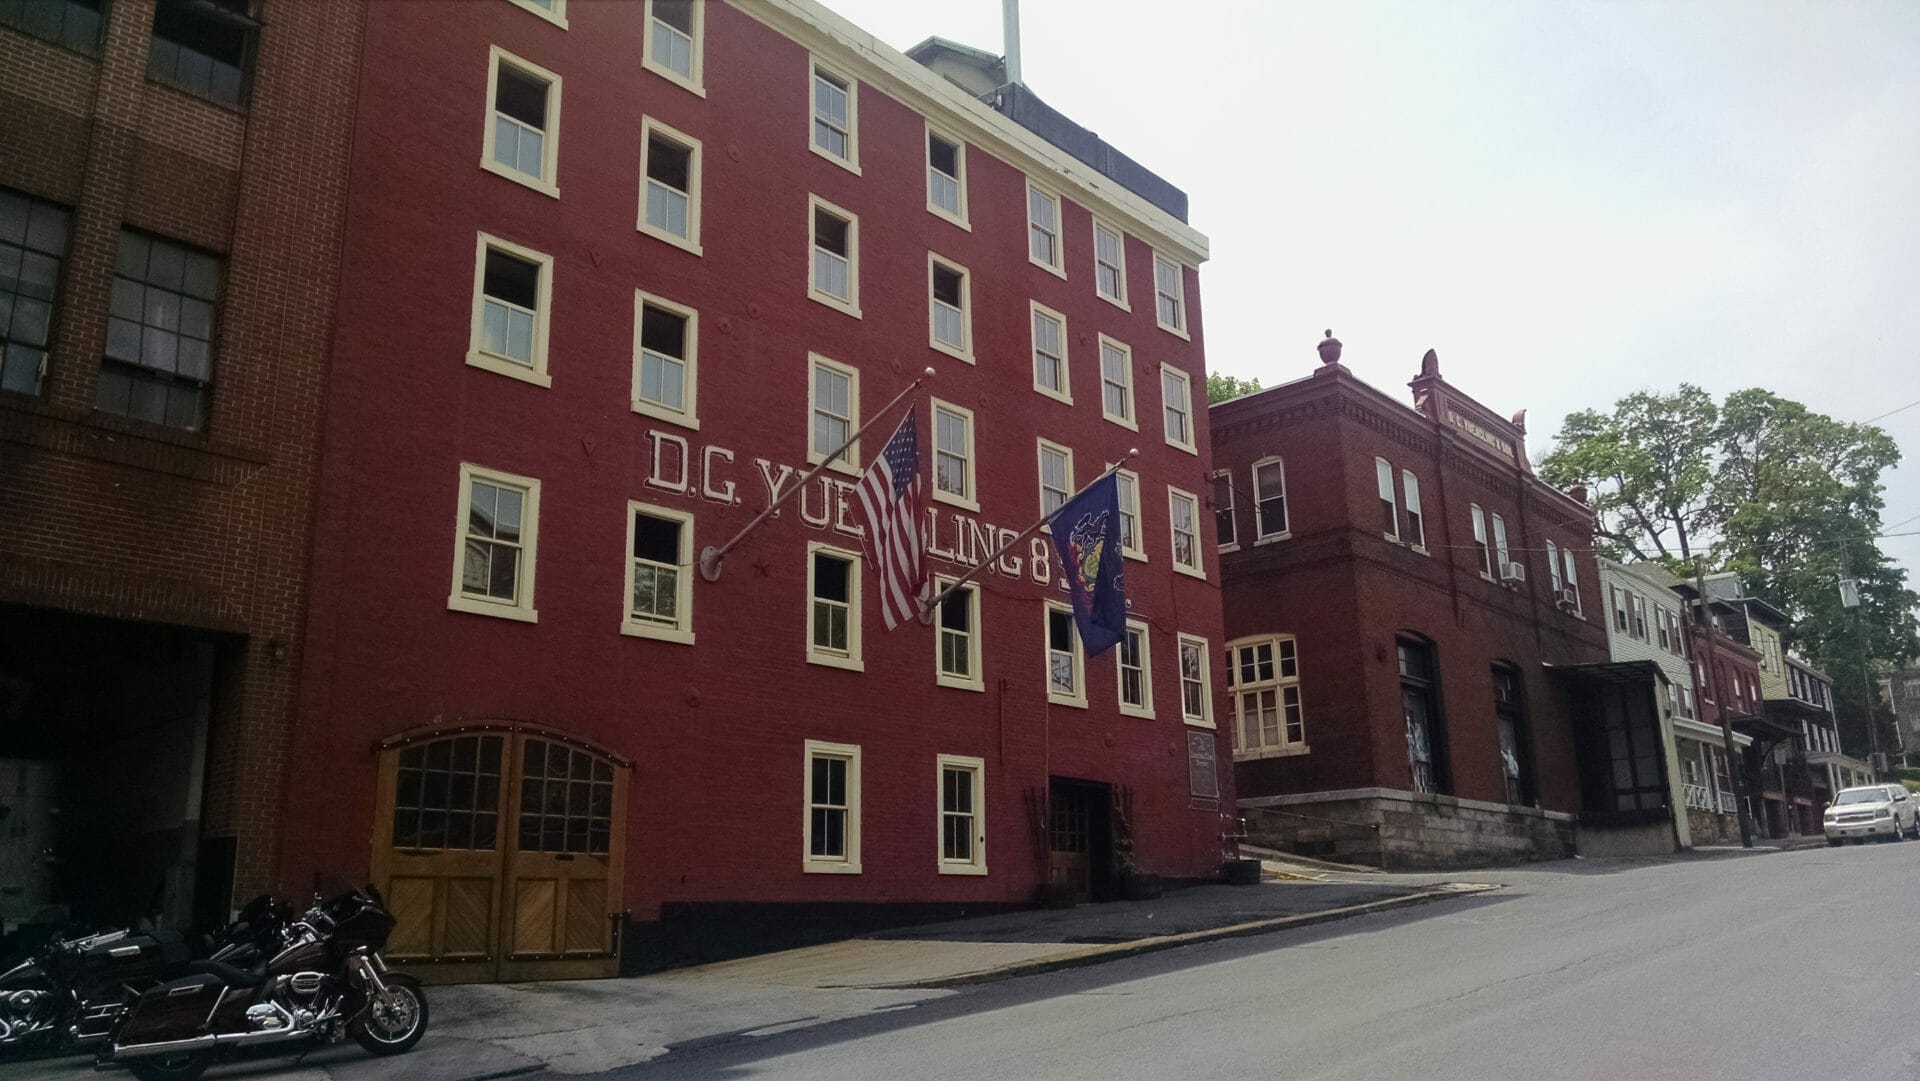 tours at yuengling brewery